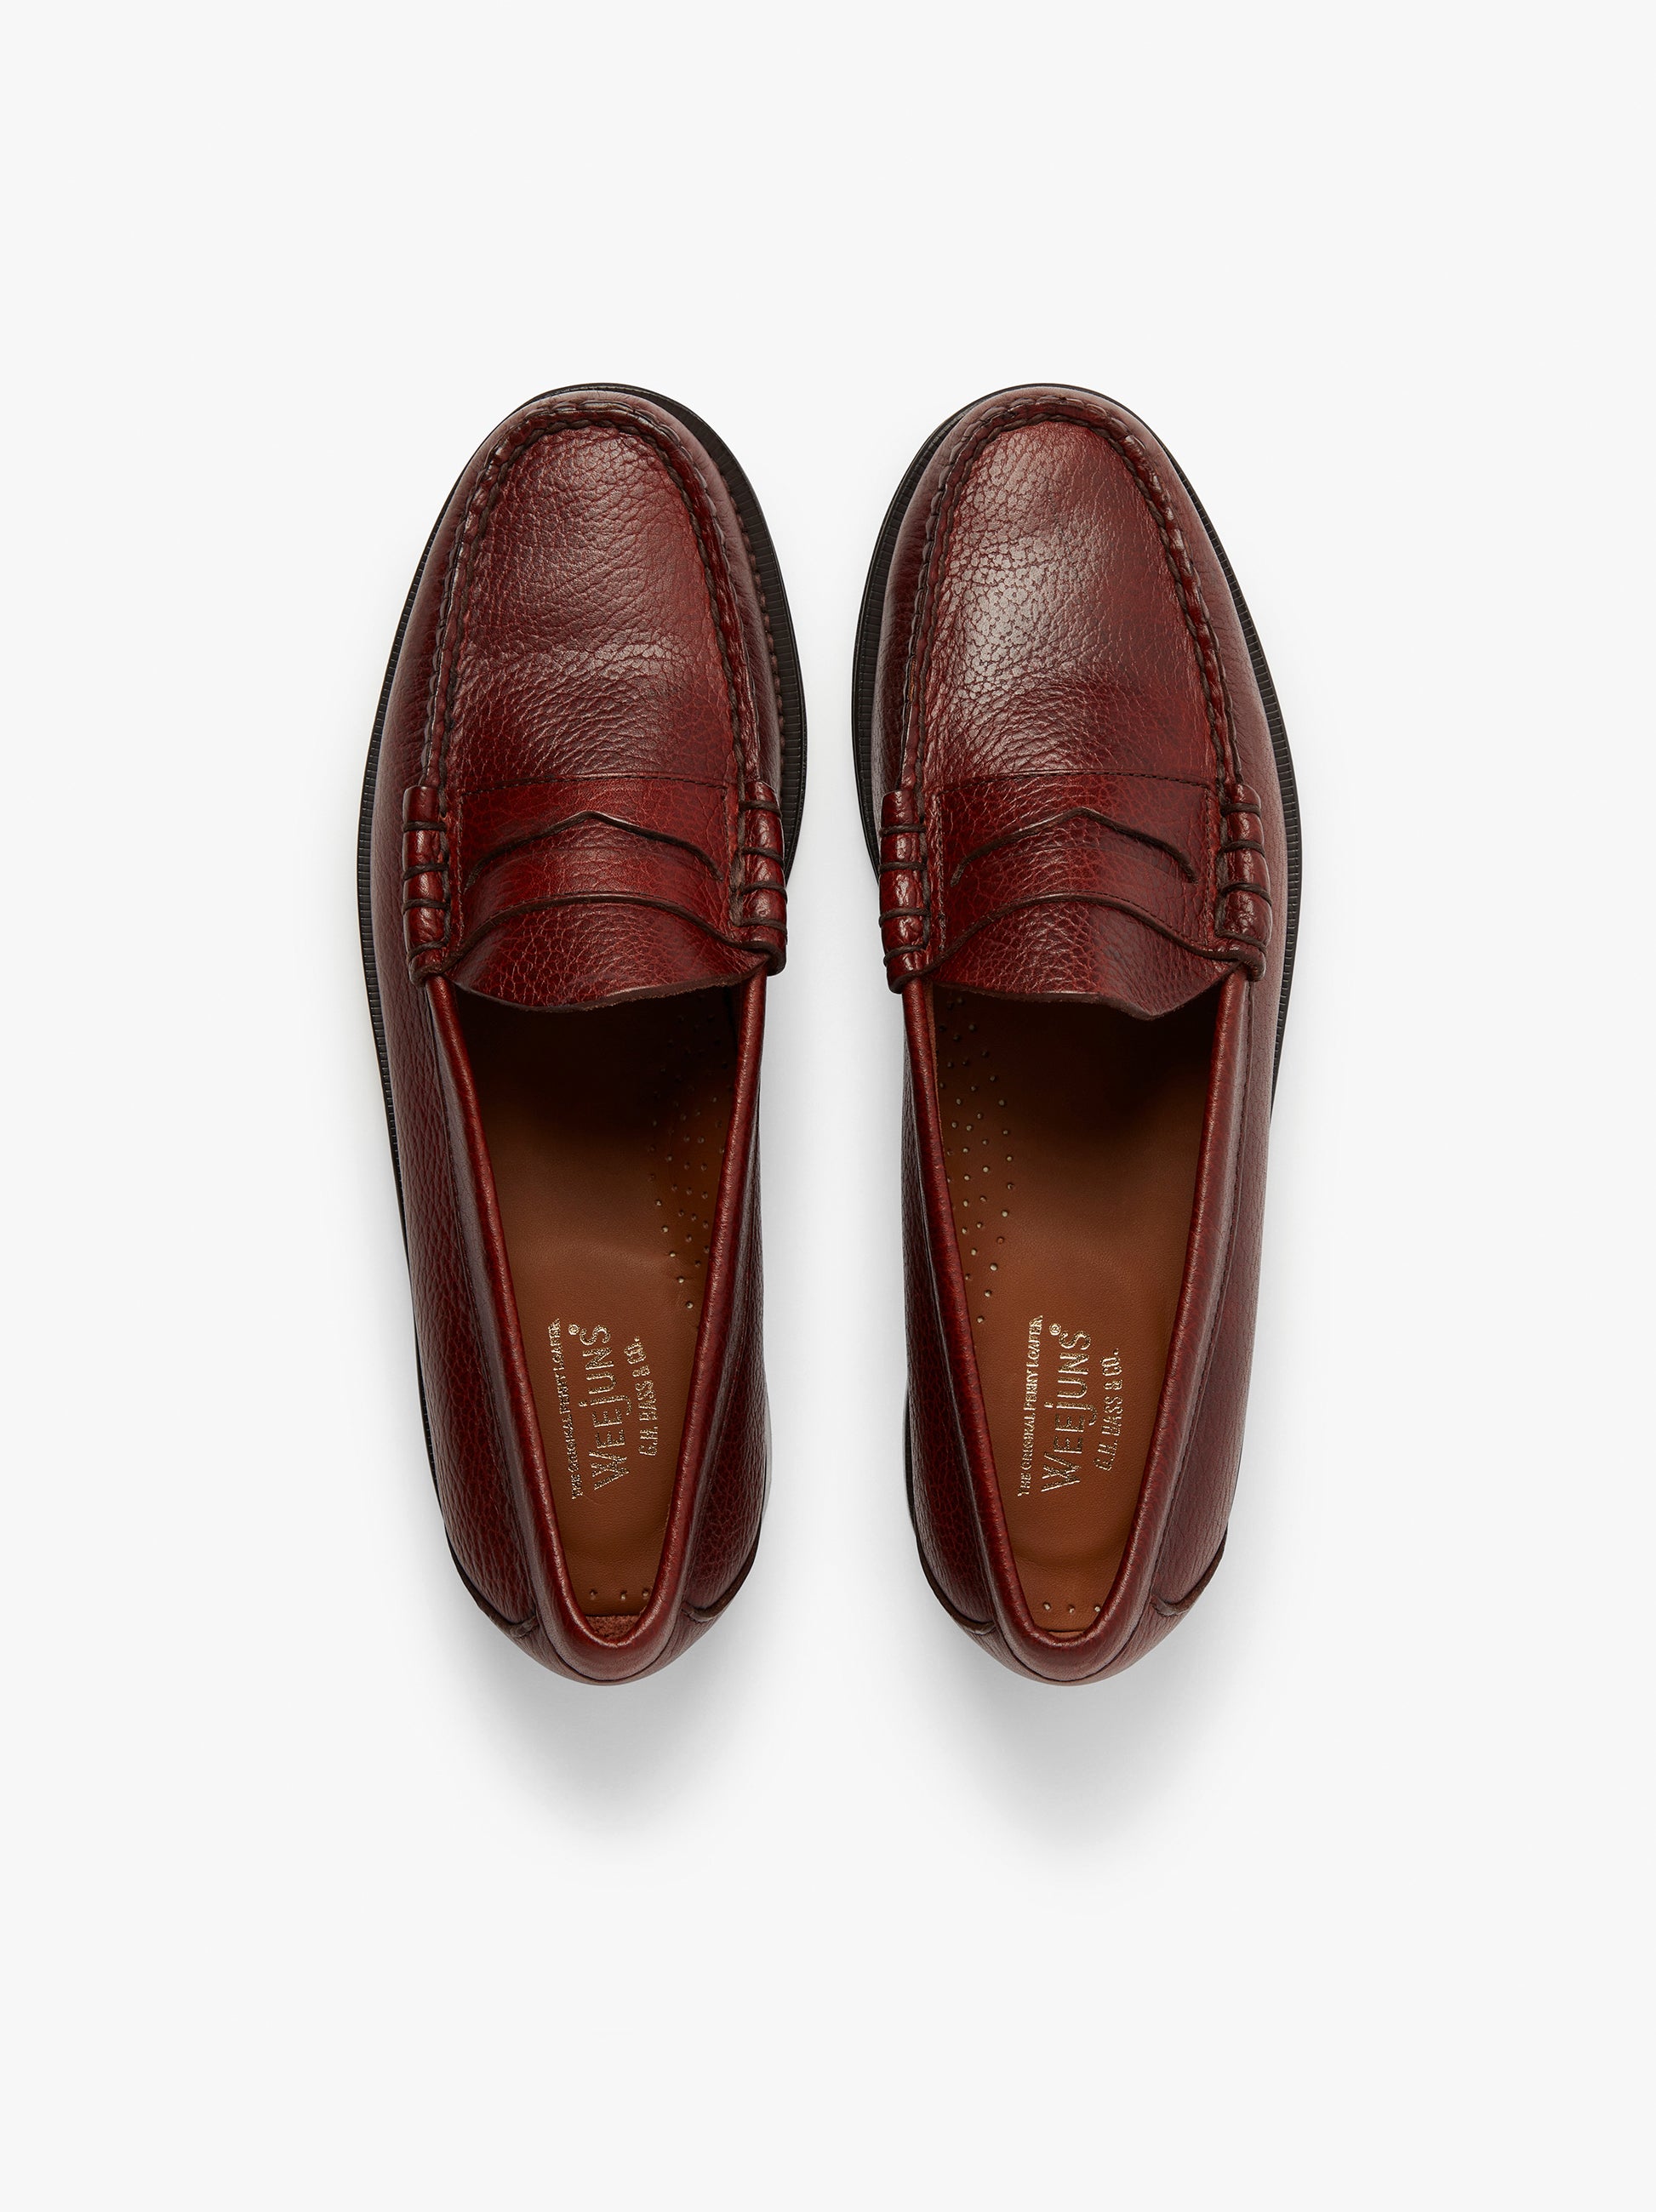 Dark Brown Leather Loafers Mens | Dark Brown Loafers – G.H.BASS 1876